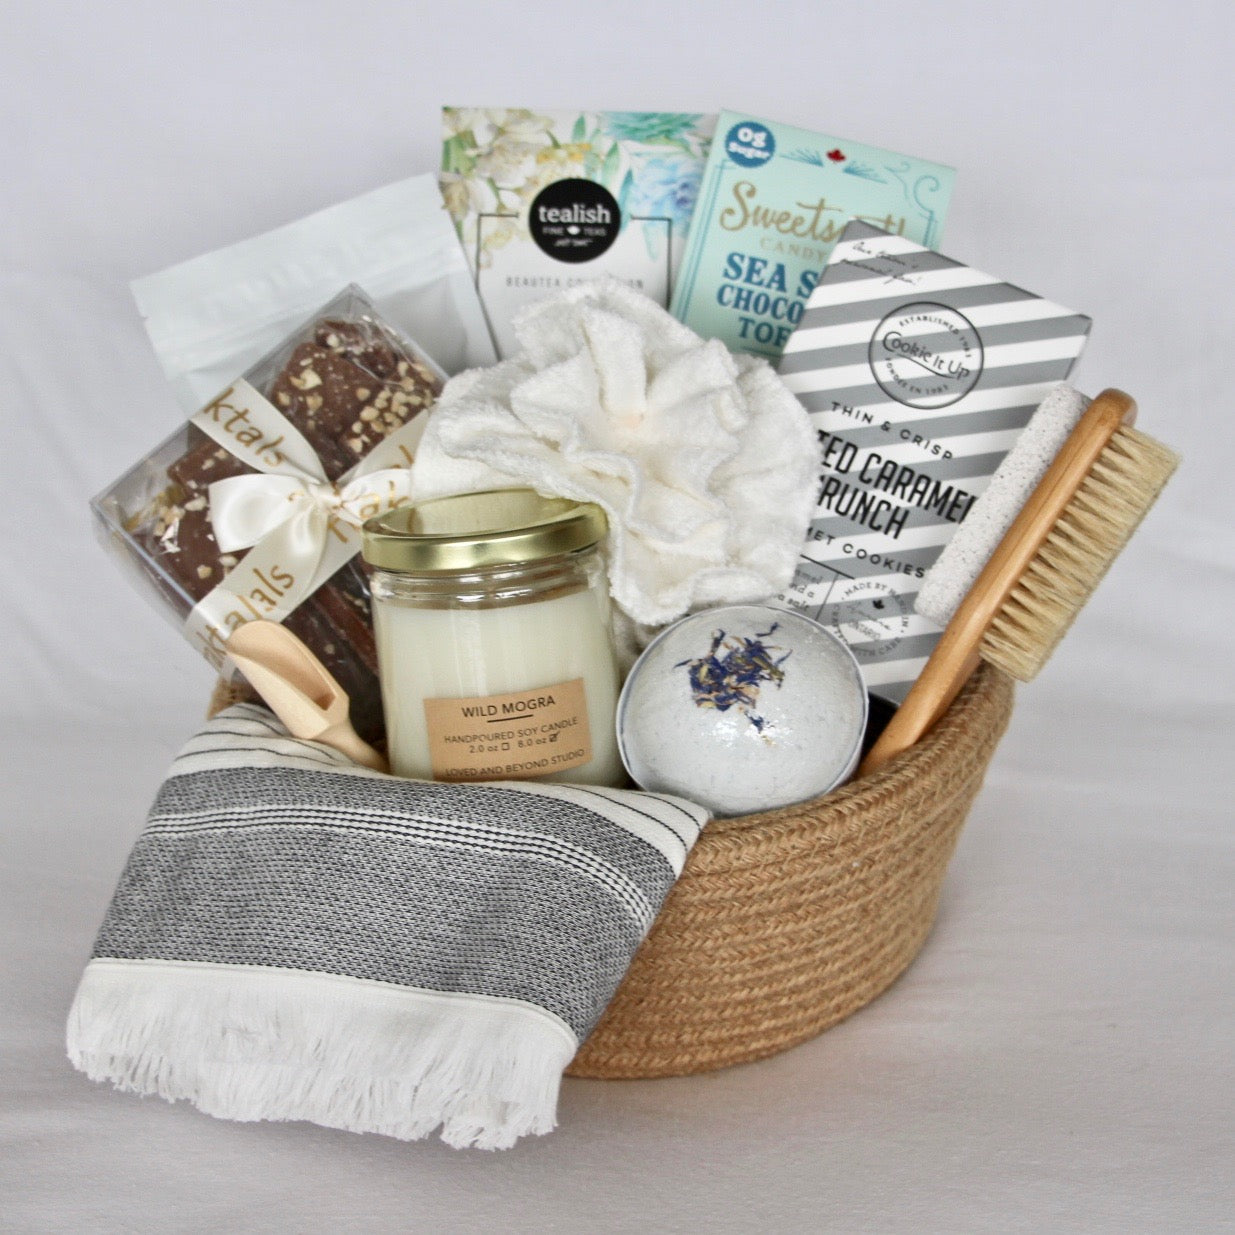 This At-Home Spa Day inspired gift basket was created for that person in your life who could really use some pampering. Filled with Canada's top quality bath products and sweets presented on a beautiful keepsake cotton & jute basket that will be enjoyed by anyone receiving it!  The perfect birthday gift or Mother's day gift